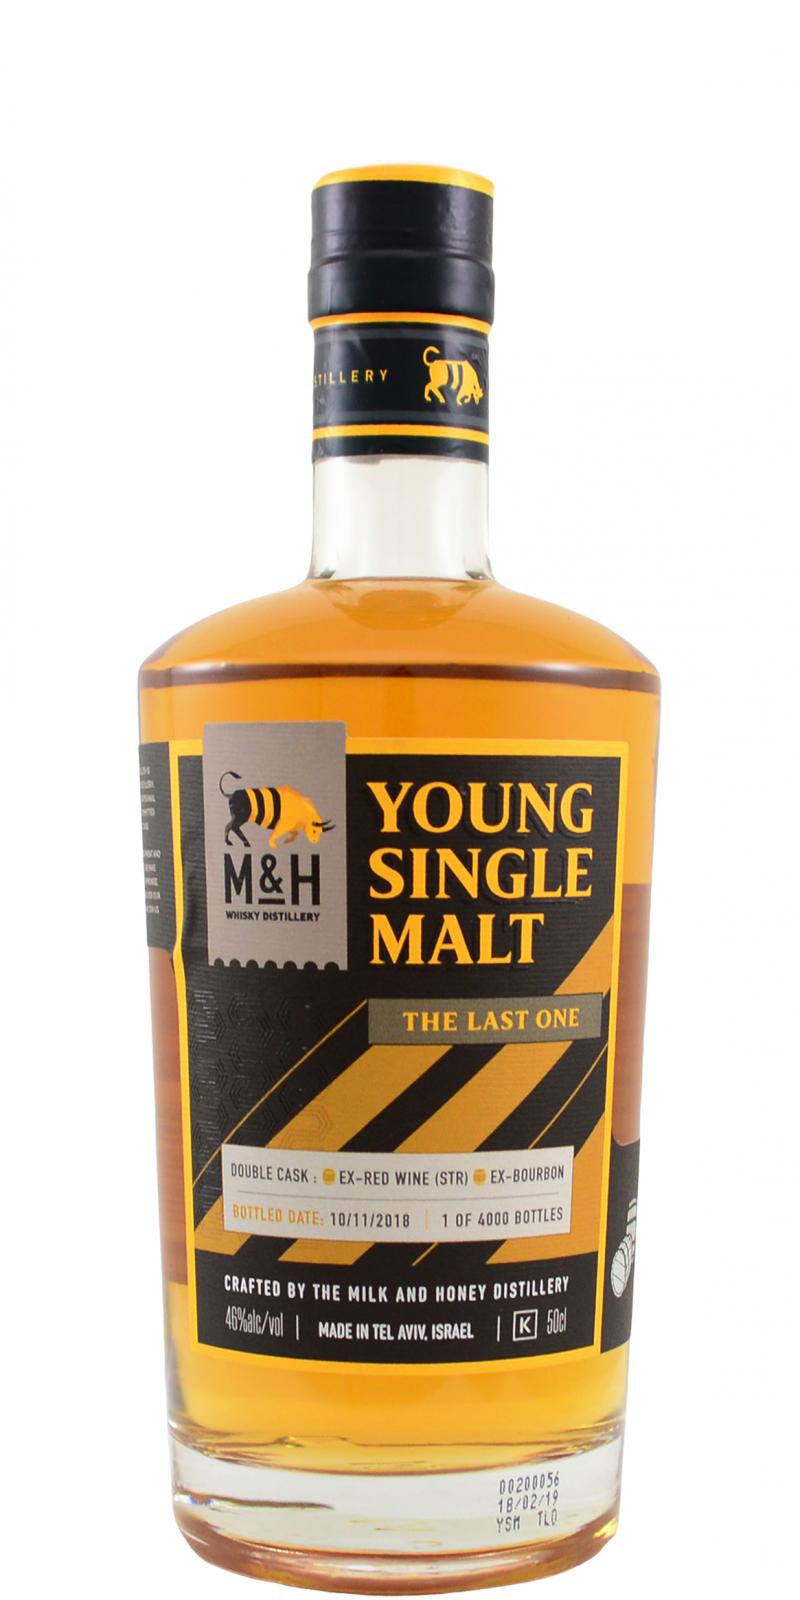 M&H The Last One 46% 500ml